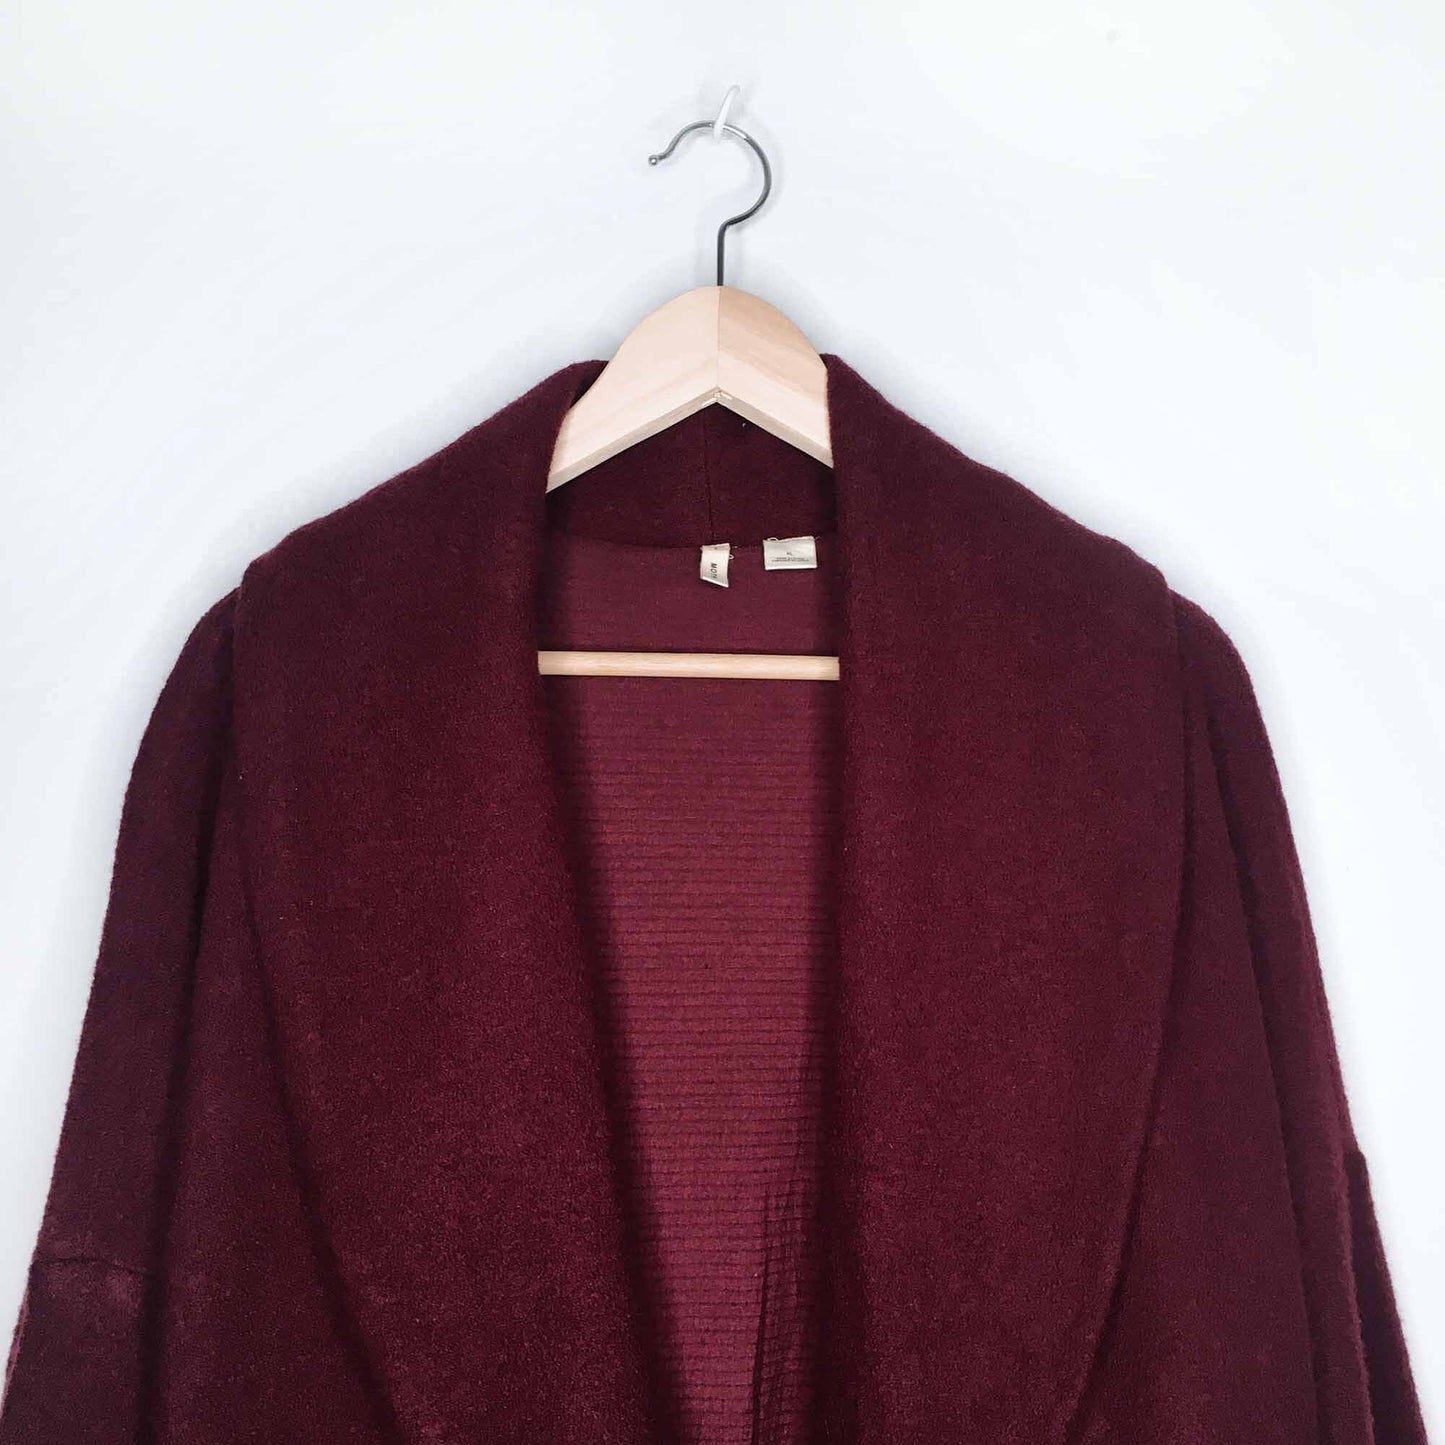 Moth Windsor boiled wool sweater cocoon coat - size xl